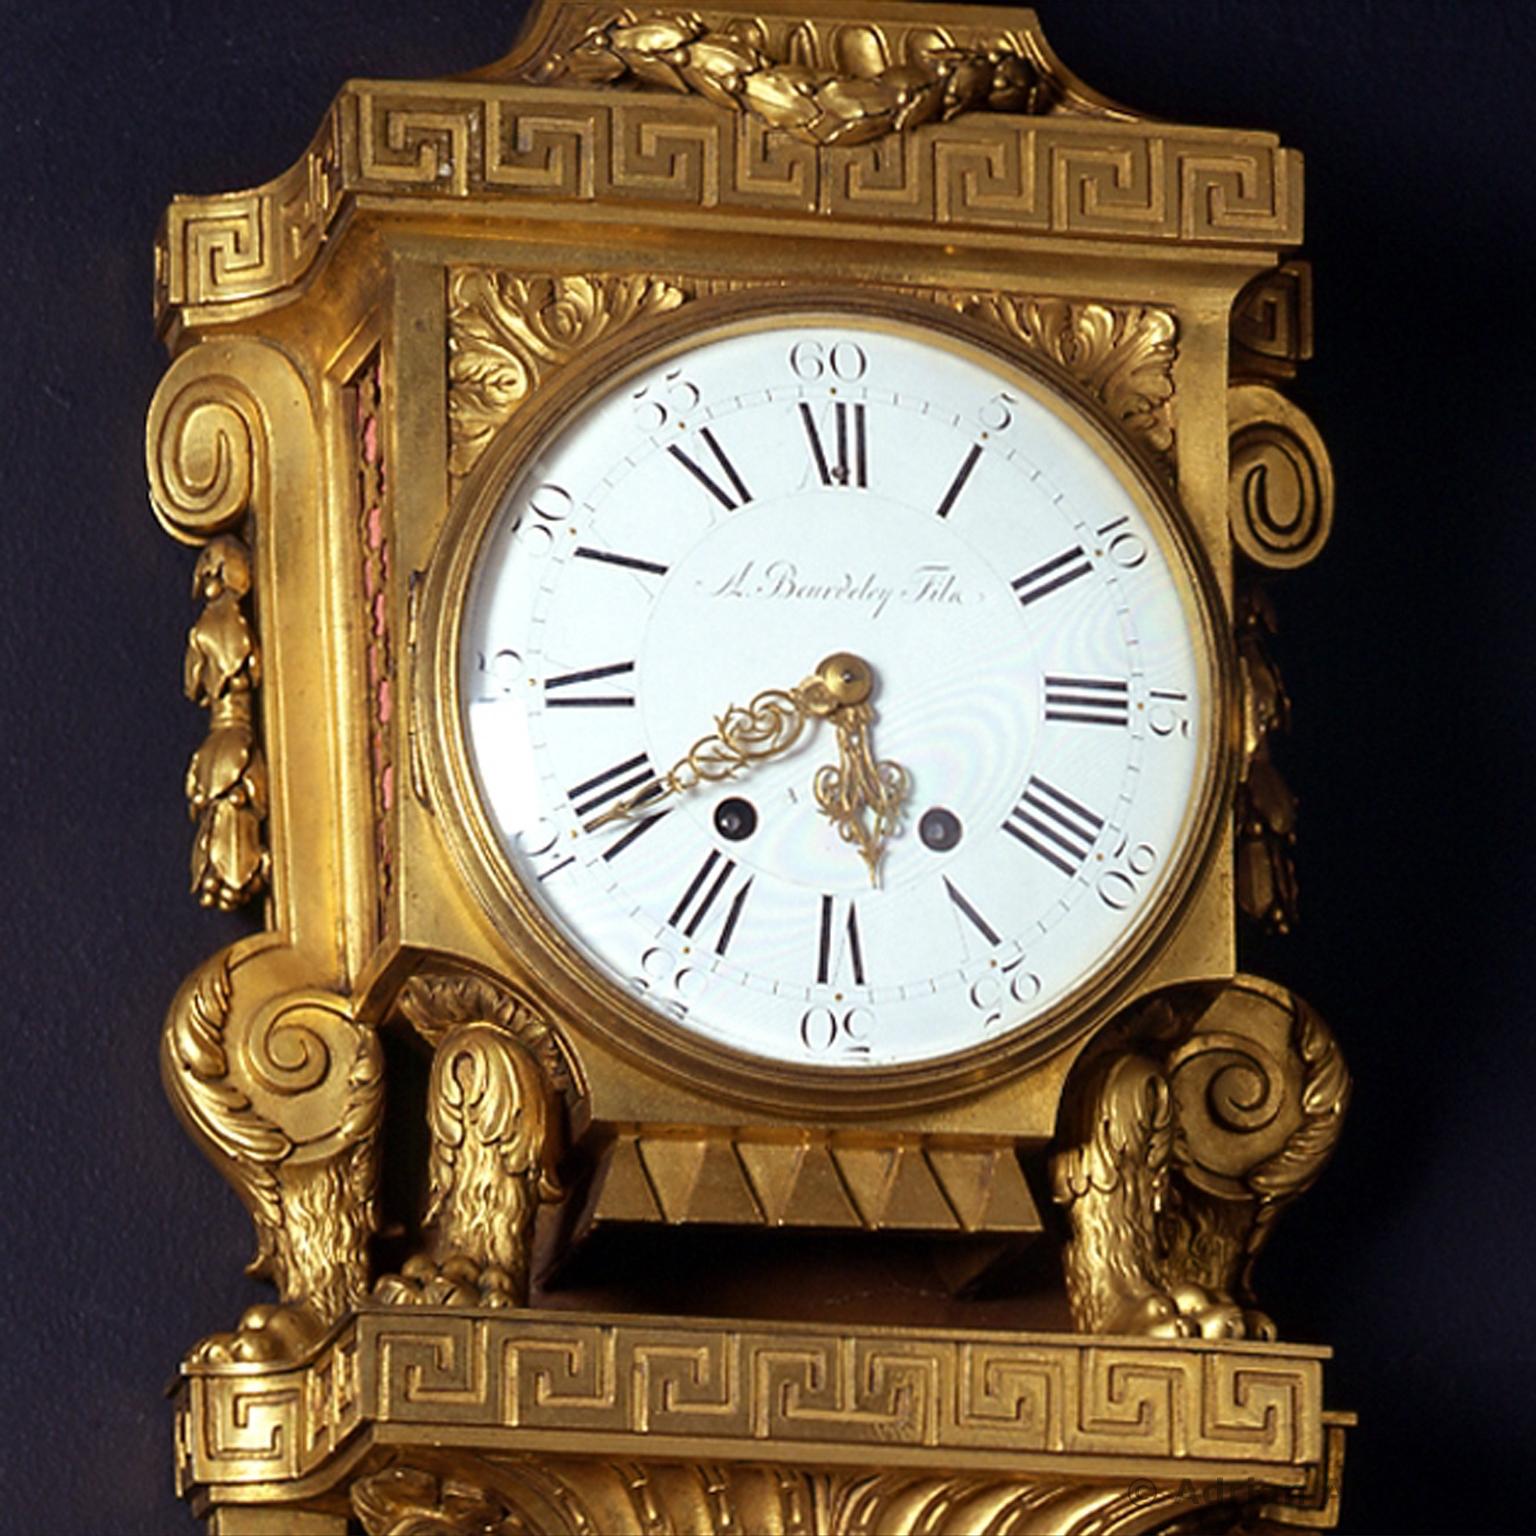 A fine Louis XVI style gilt-bronze Cartel clock, by Beurdeley. 

Signed 'A Beurdeley Fils à Paris'.

Surmounted by a ribbon tied globe the gilt-bronze case of this fine cartel clock presents a rich decorative vocabulary inspired by classical